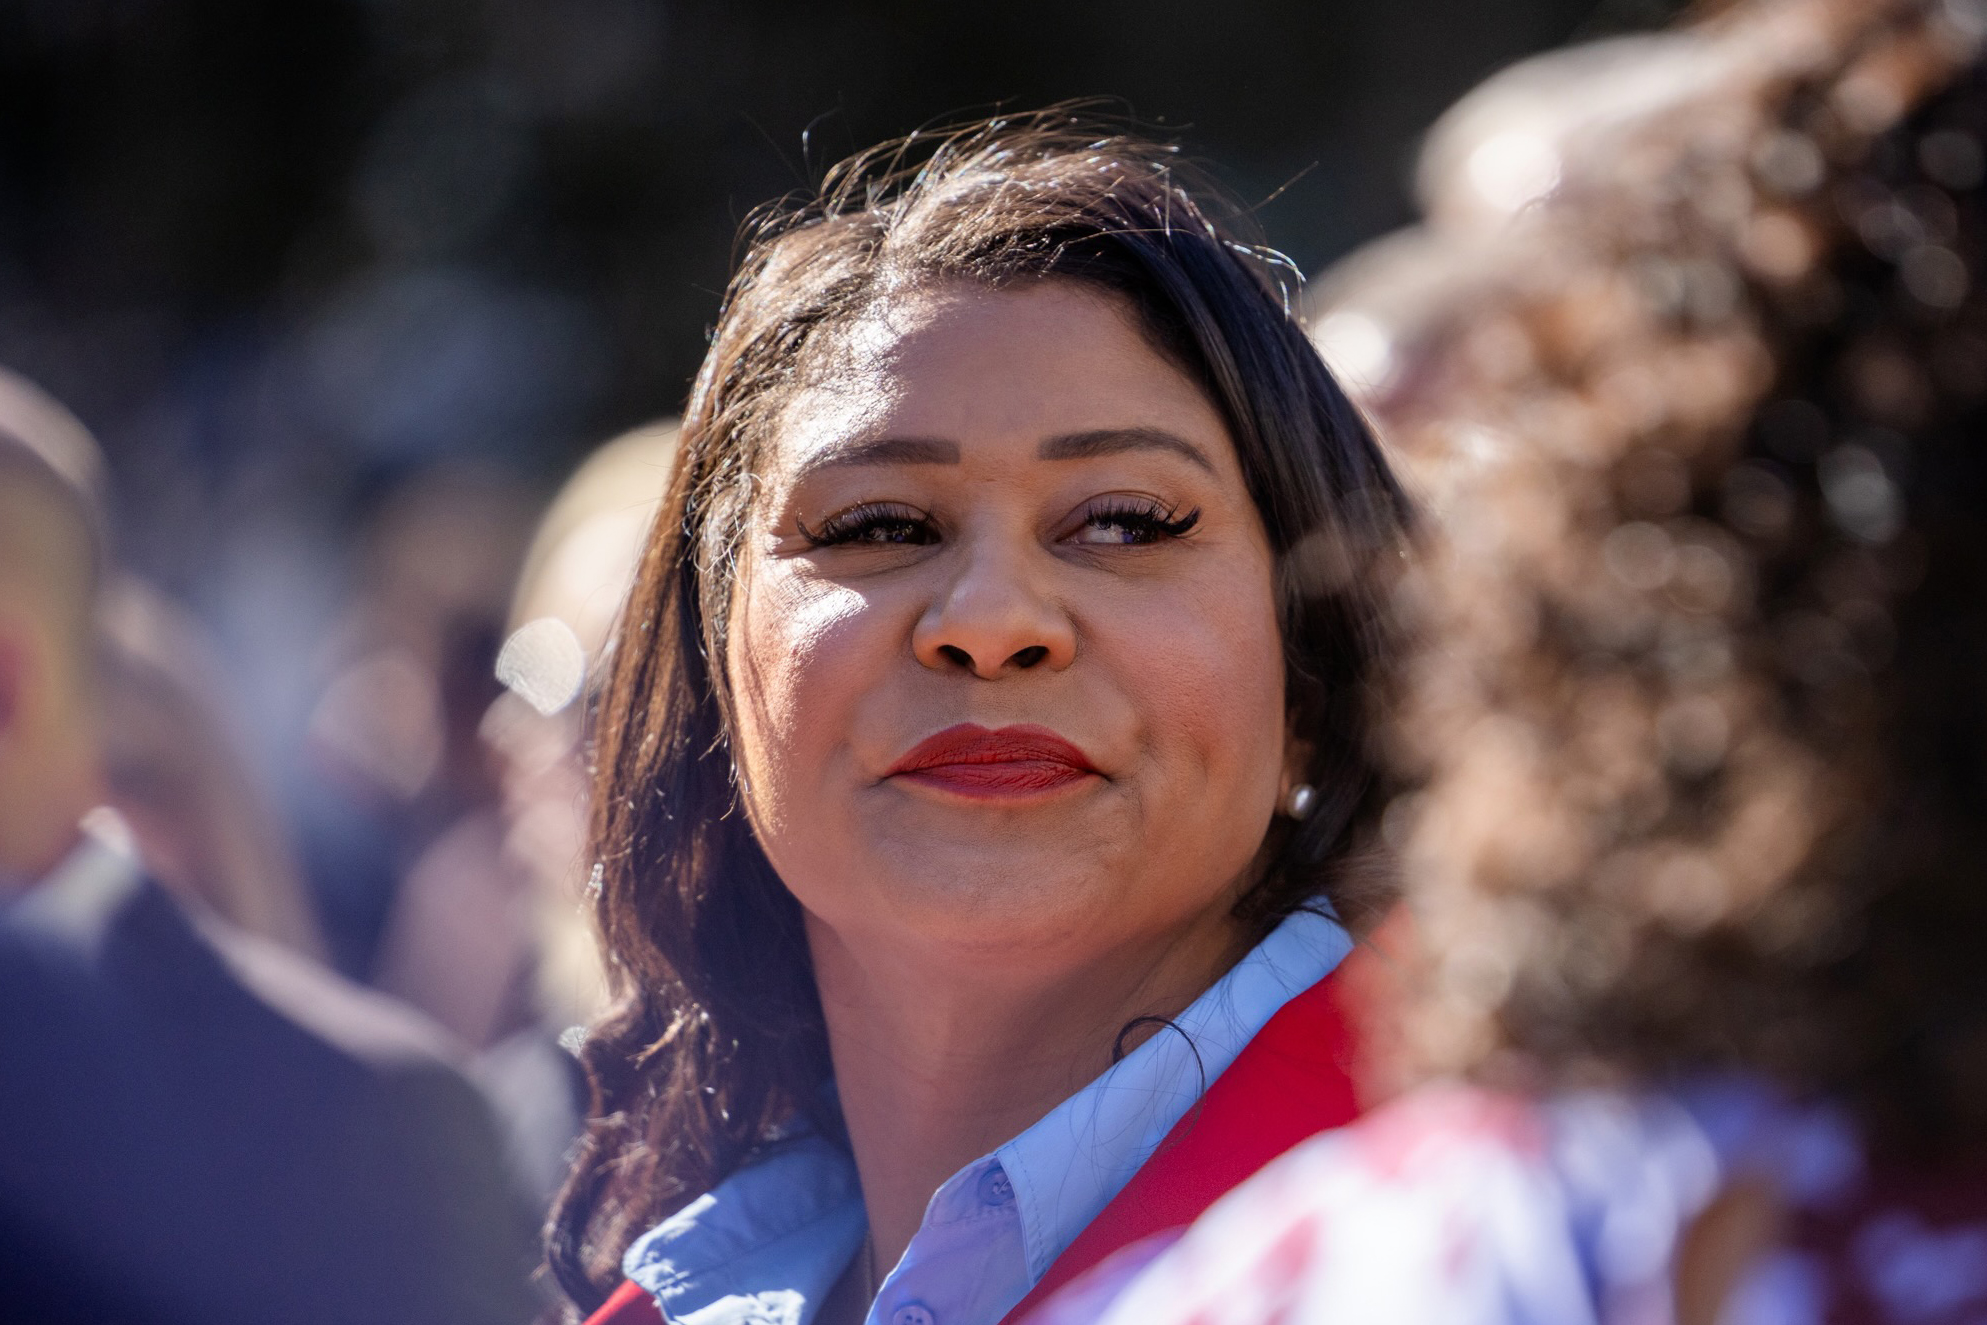 San Francisco Mayor London Breed, with a serious expression, looks towards the right of the frame as she's surrounded by unidentifiable people that are out of focus.